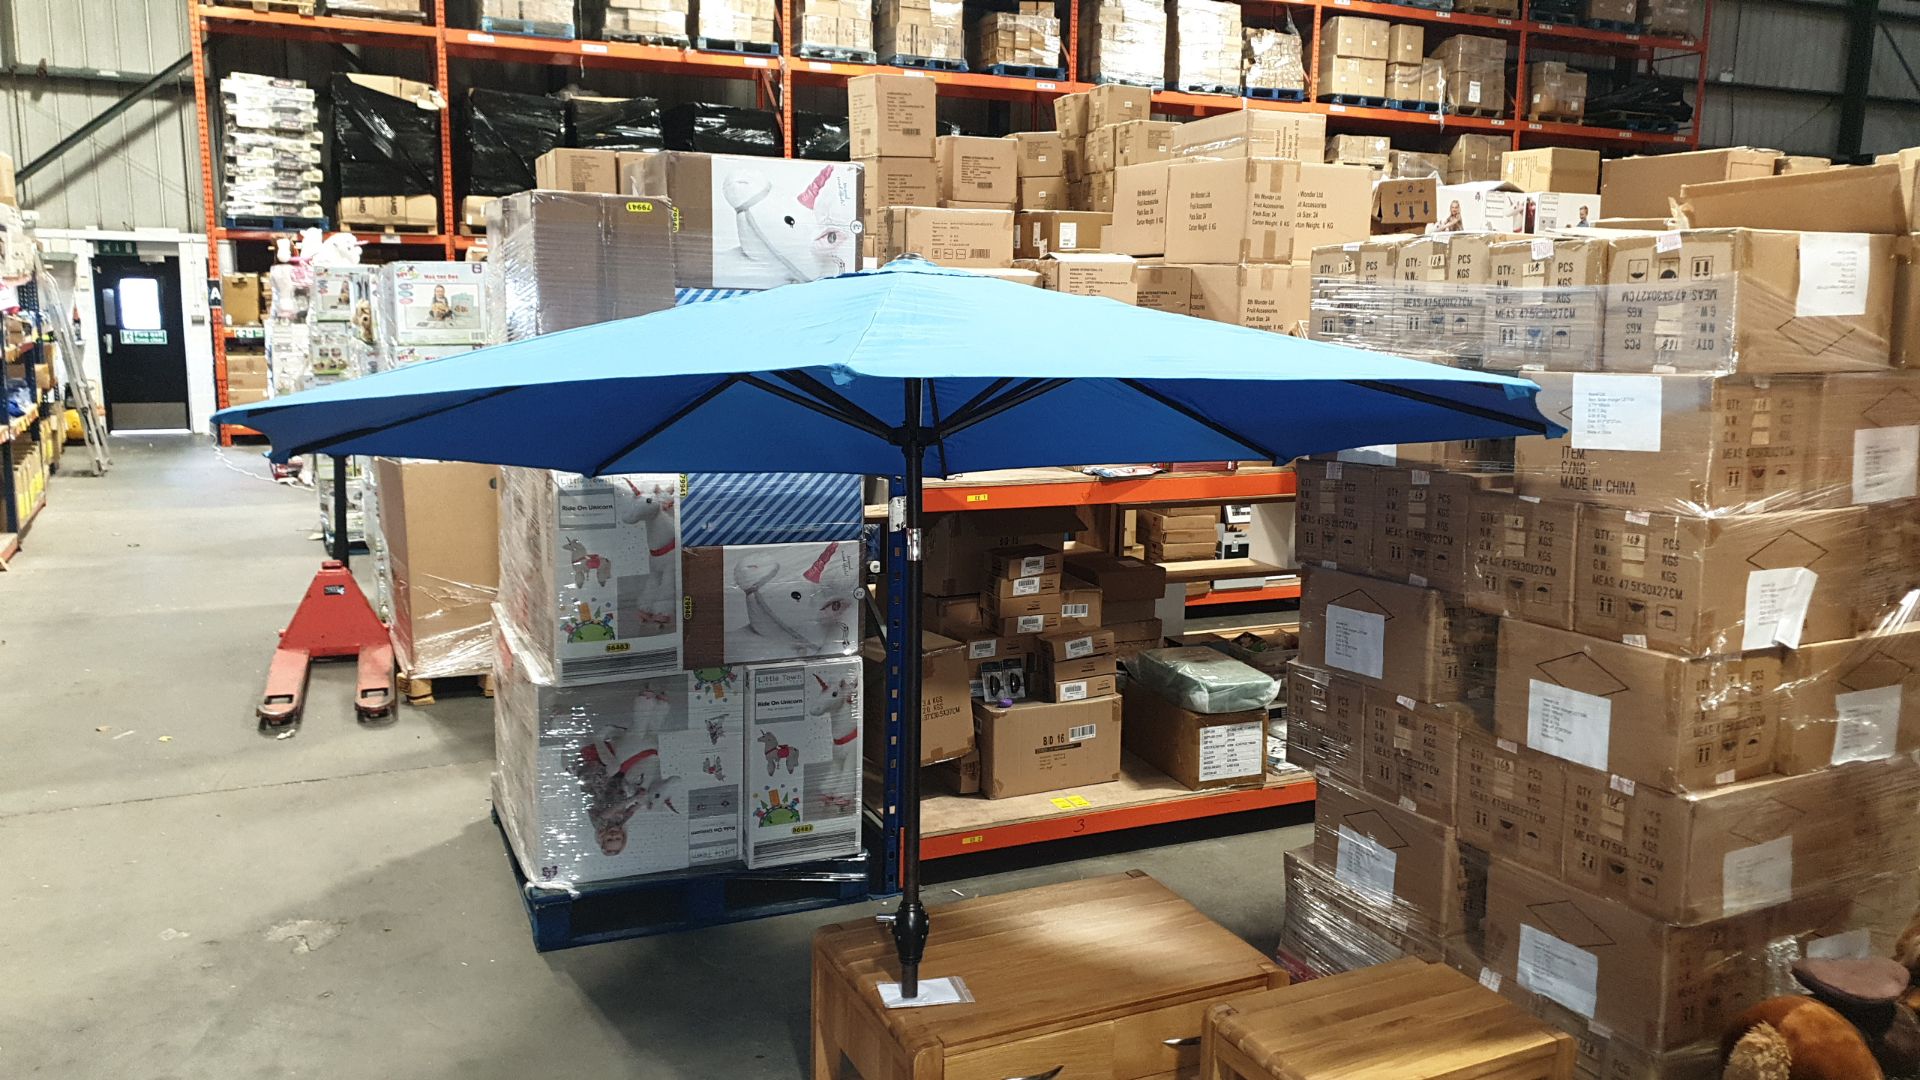 (LOT FOR THURSDAY 28TH MAY AUCTION) 3 X WIND UP LARGE MID BLUE PARASOLS - IN 3 BOXES